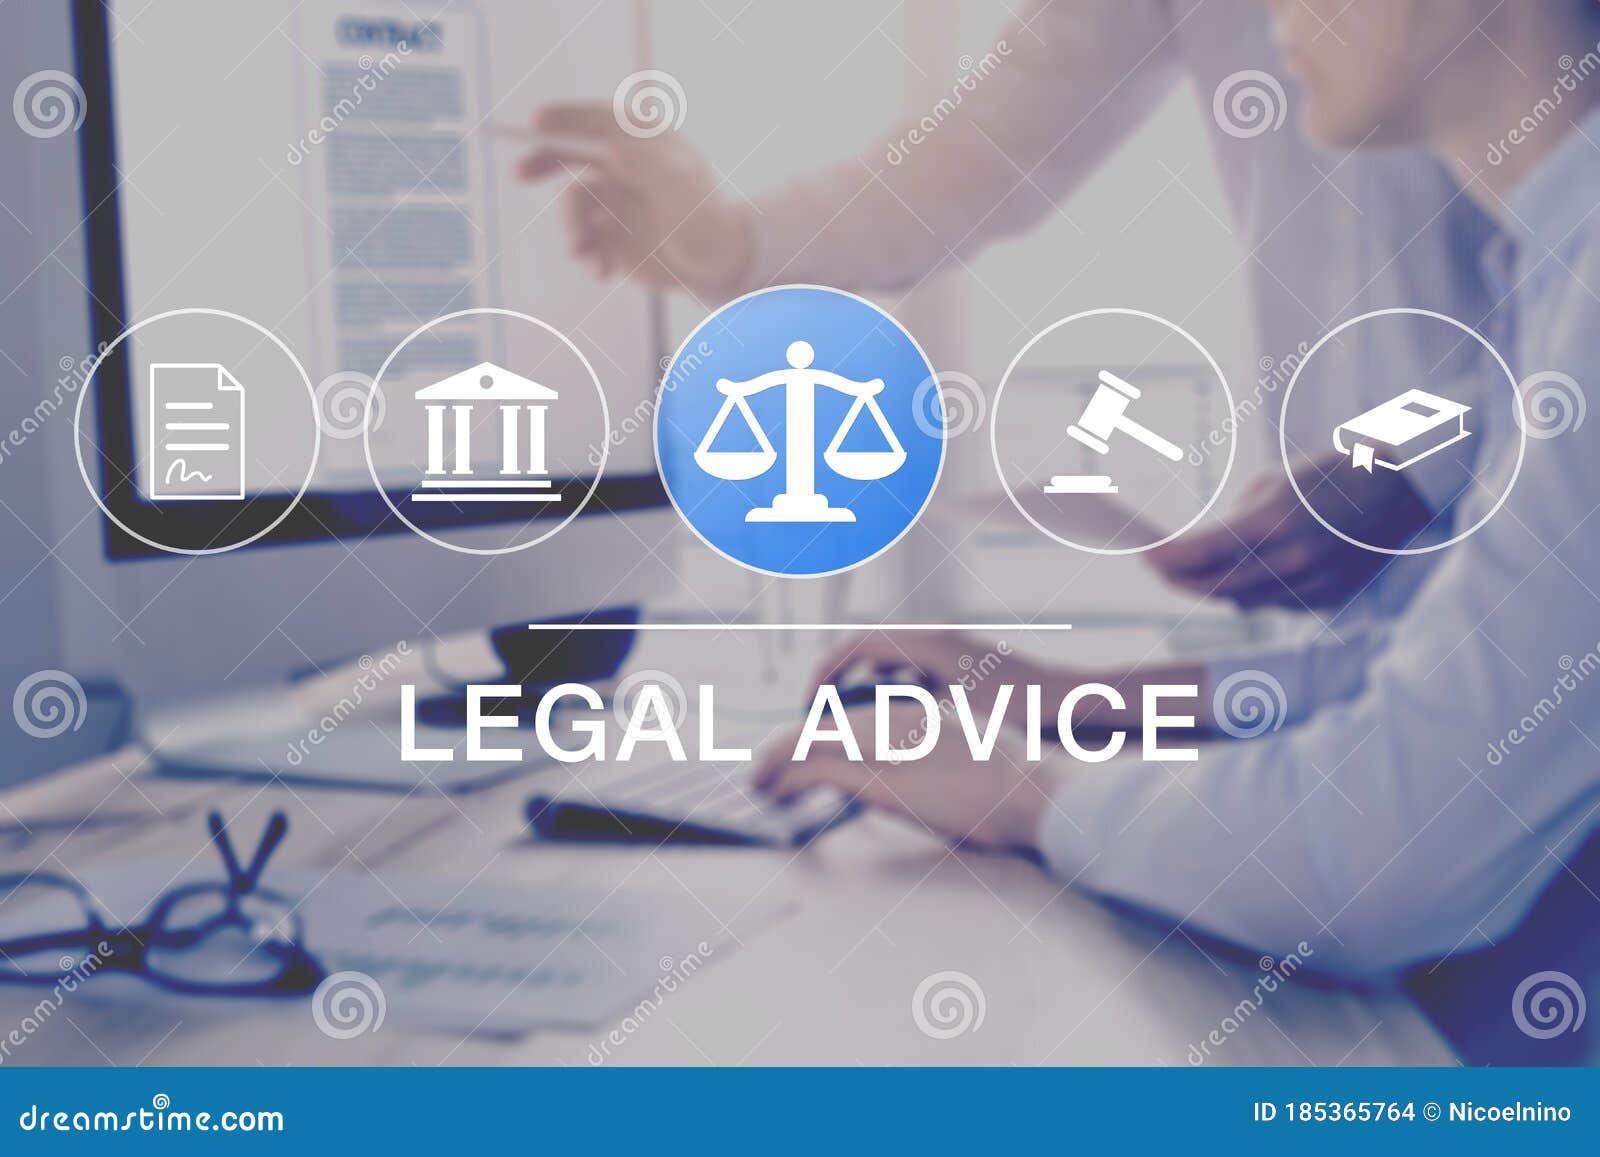 legal advice and lawyer consulting service, concept with icons of justice, court, law, contract and in background two consultant